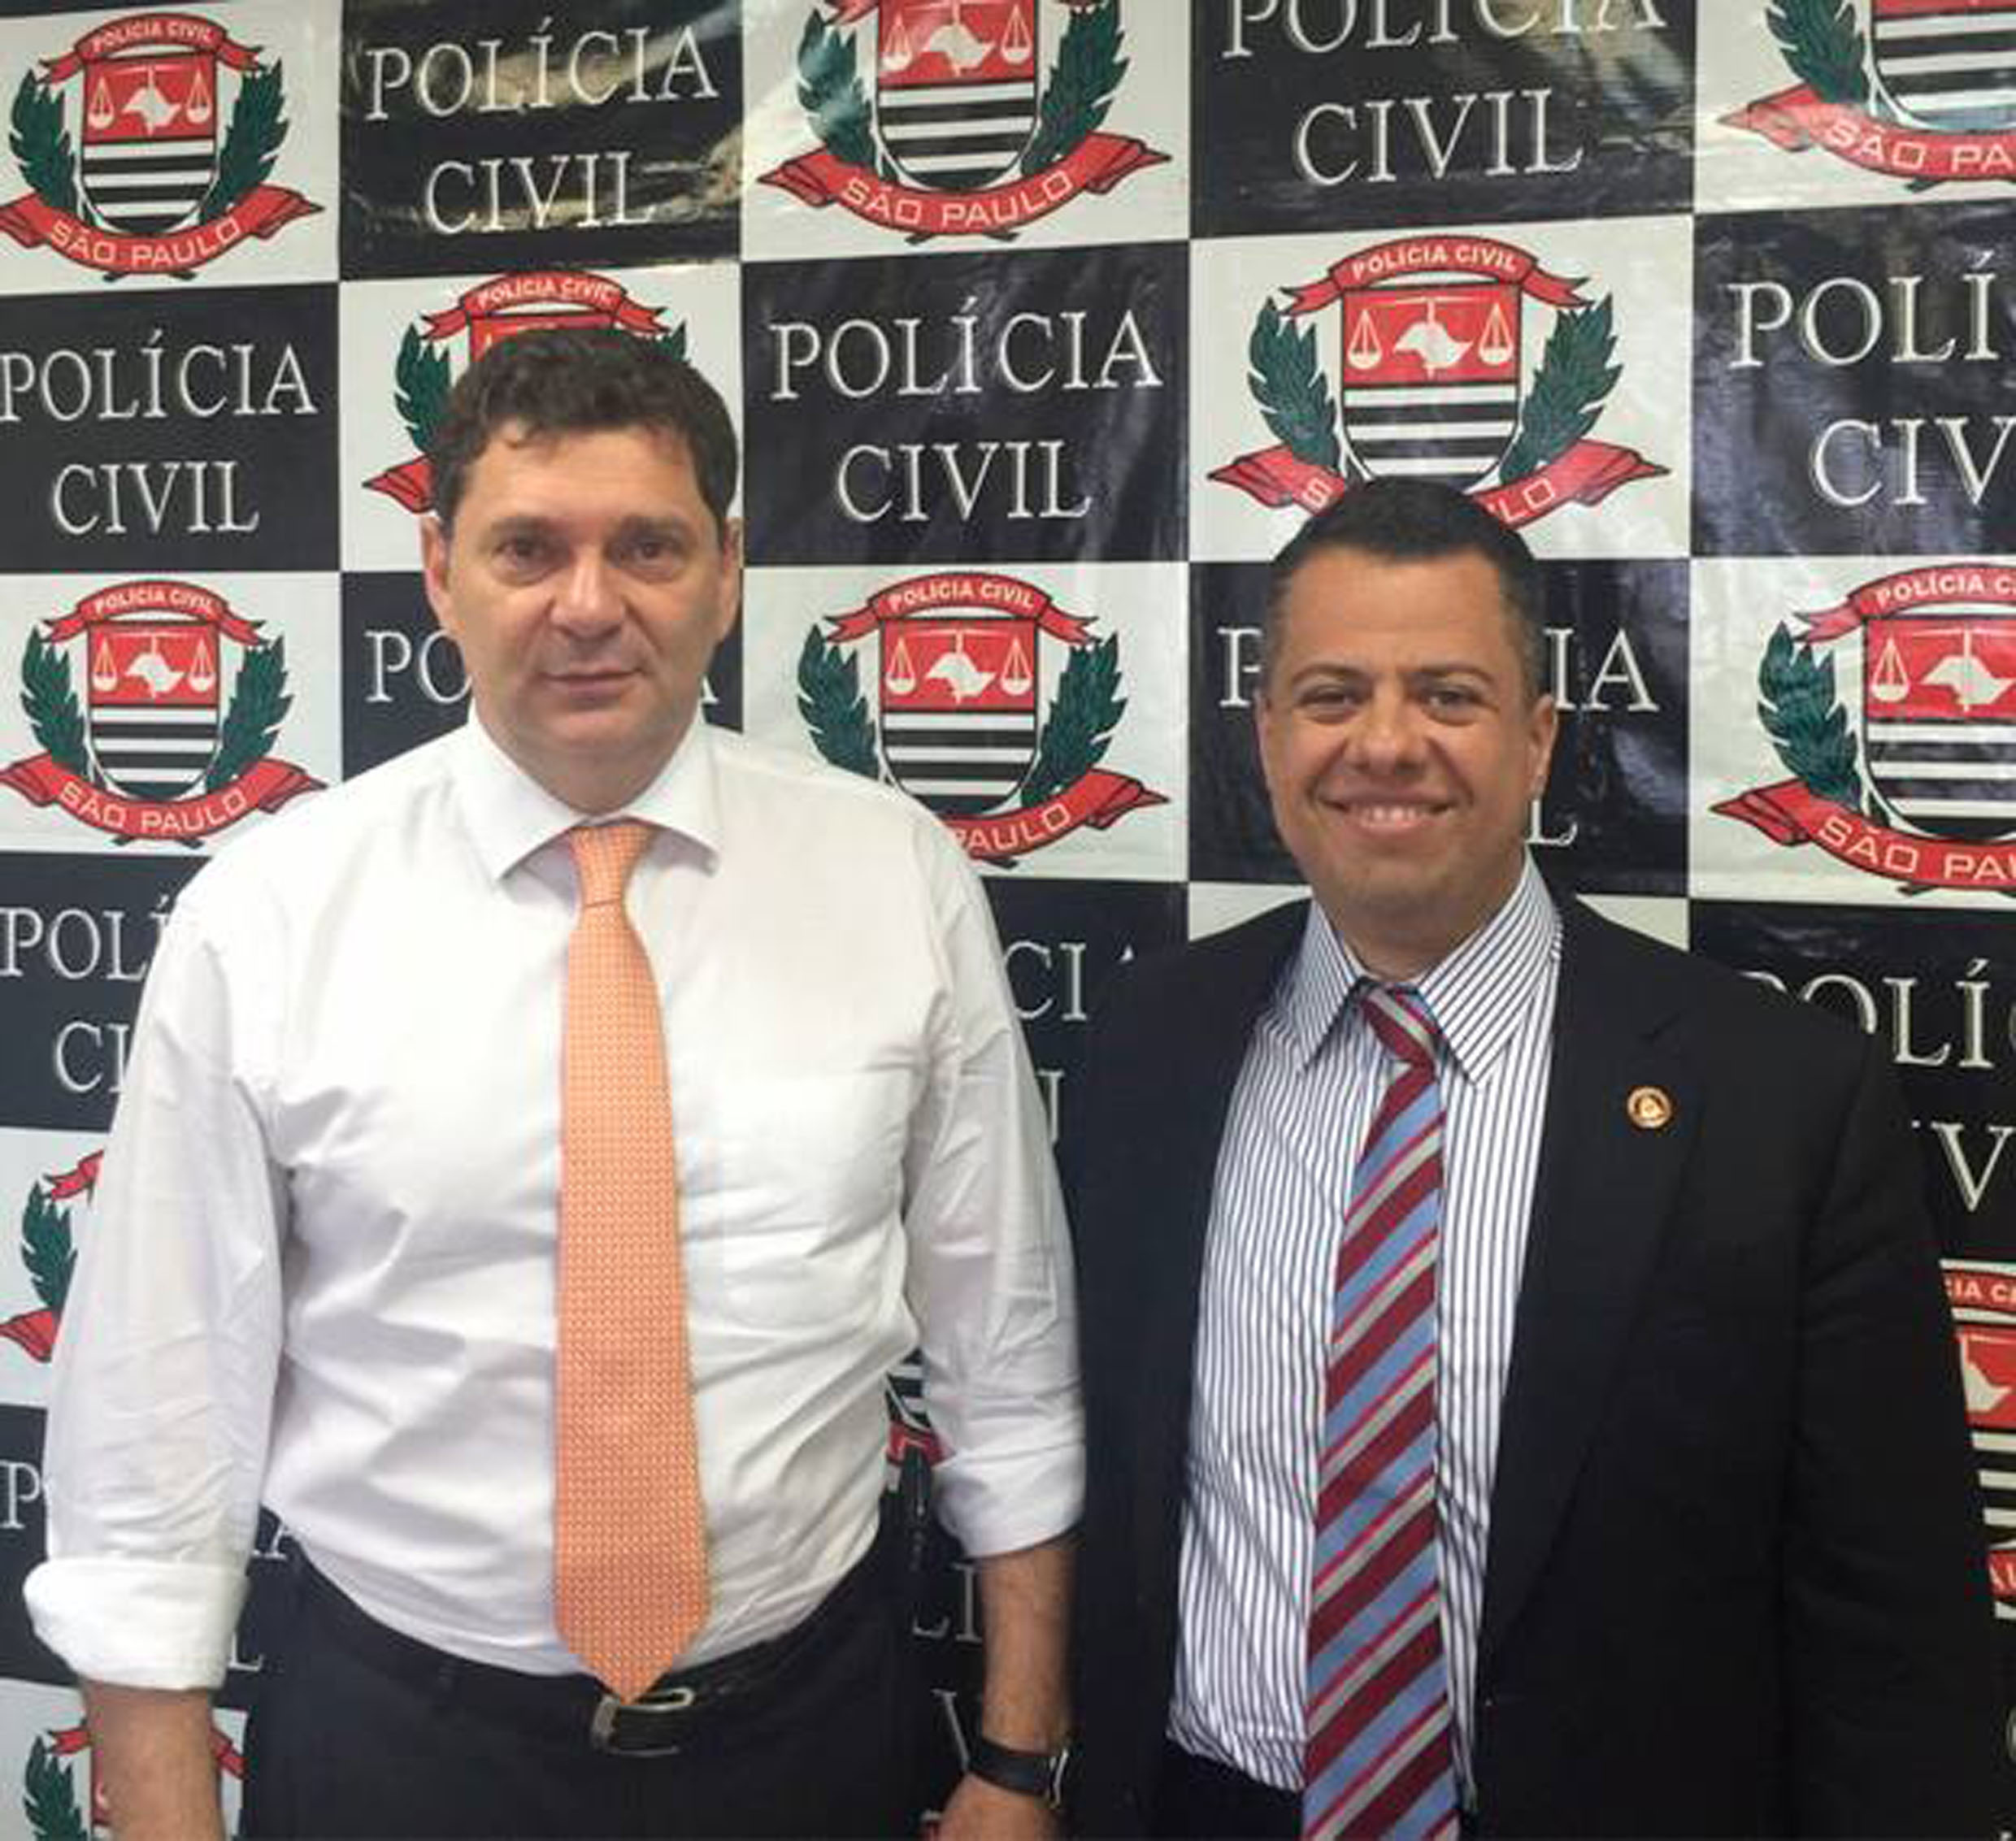 Youssef Abou Chahin e Wellington Moura<a style='float:right;color:#ccc' href='https://www3.al.sp.gov.br/repositorio/noticia/N-04-2015/fg169685.jpg' target=_blank><i class='bi bi-zoom-in'></i> Clique para ver a imagem </a>